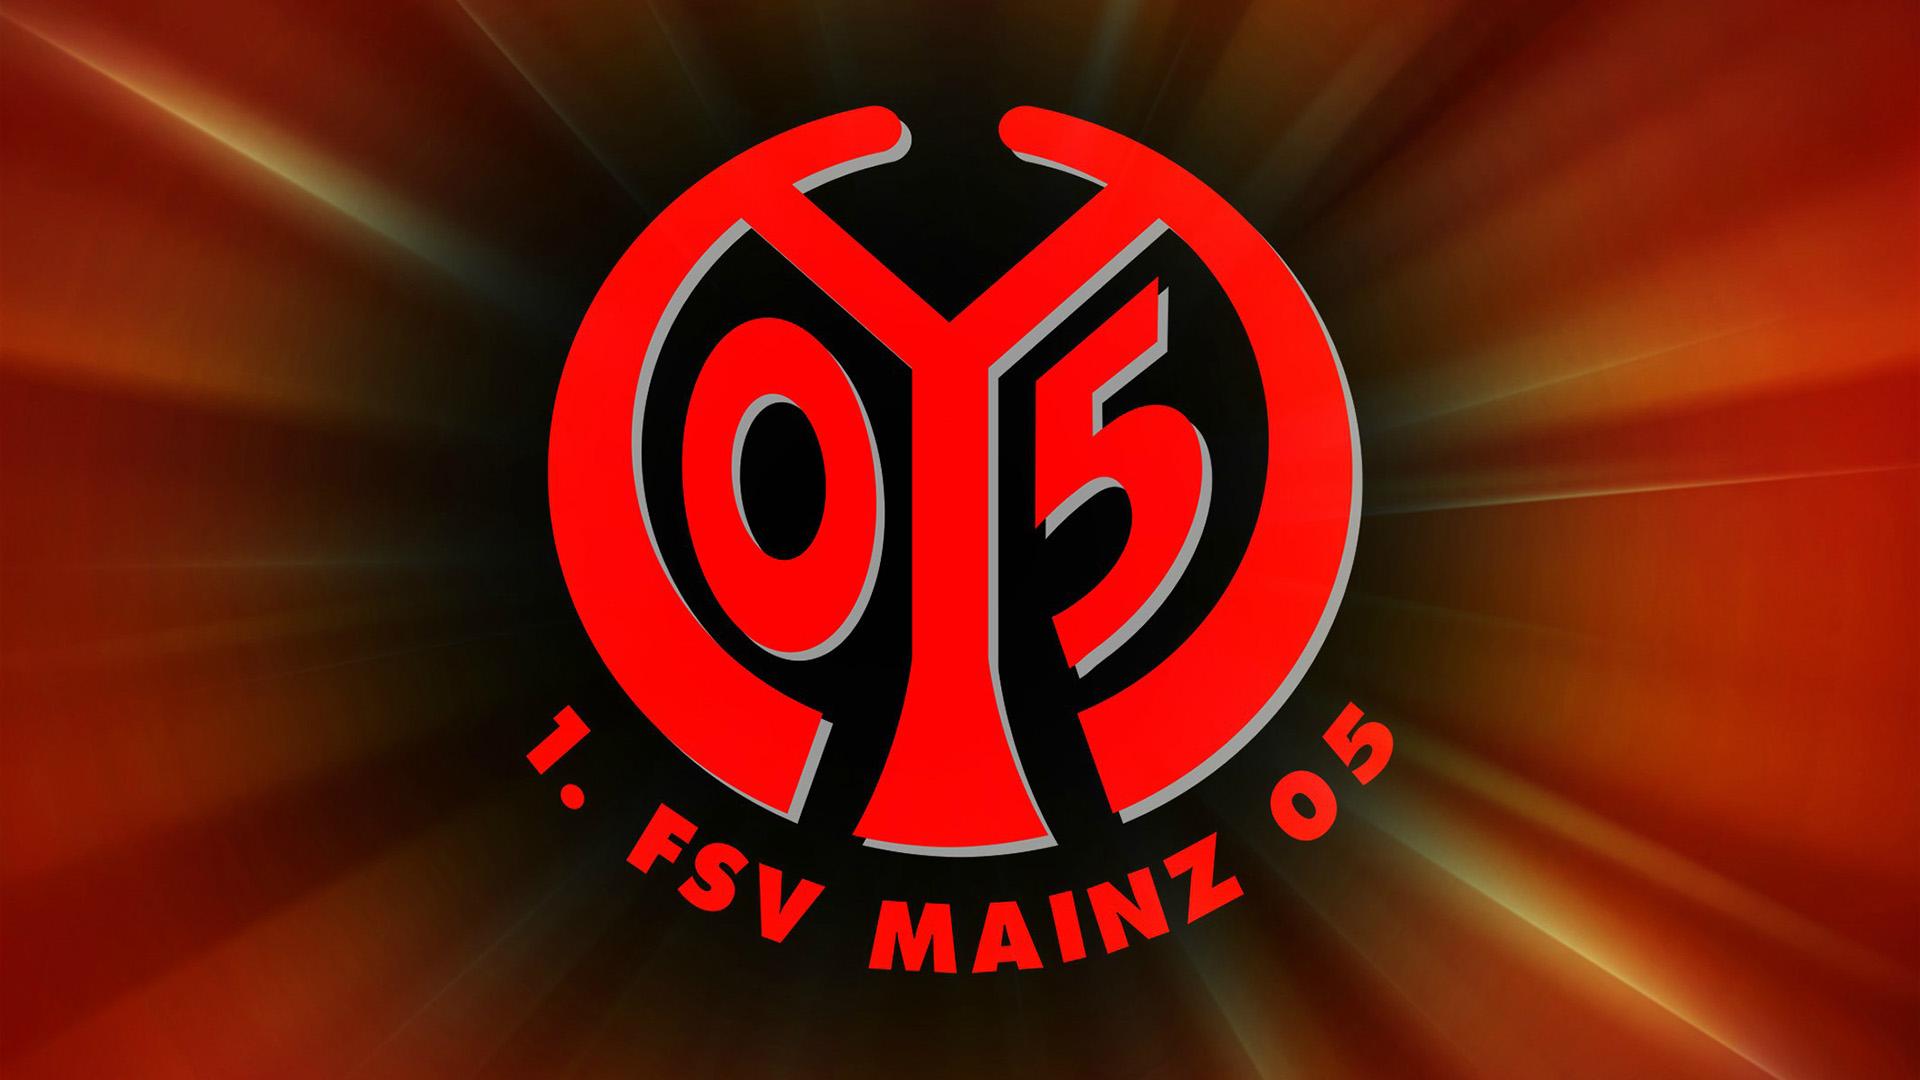 mainz-05-wallpaper-fsv-mainz-05-wallpapers-wallpaper-cave-only-images